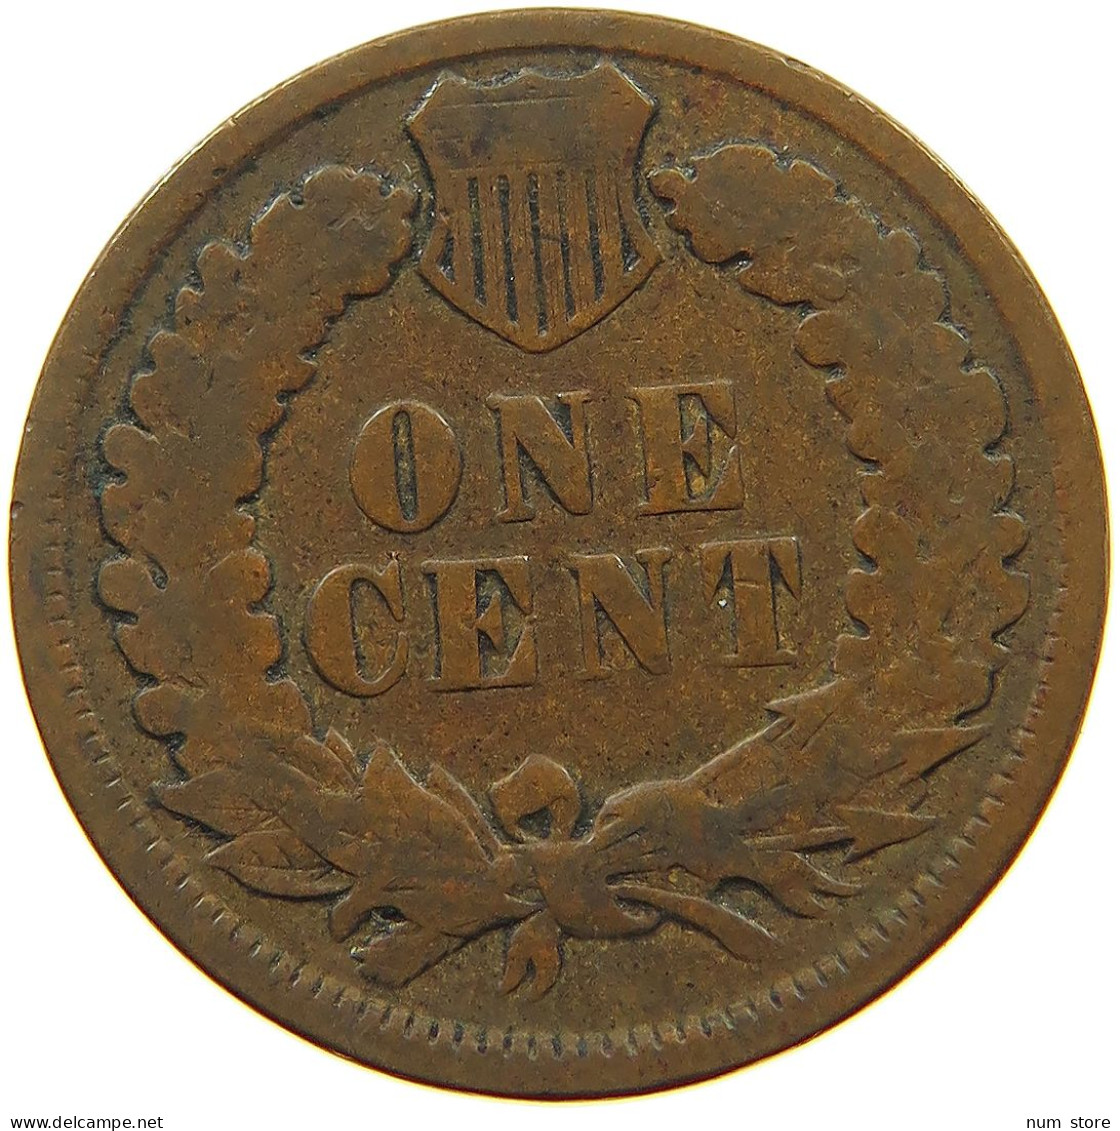 UNITED STATES OF AMERICA CENT 1893 INDIAN HEAD #s063 0413 - 1859-1909: Indian Head